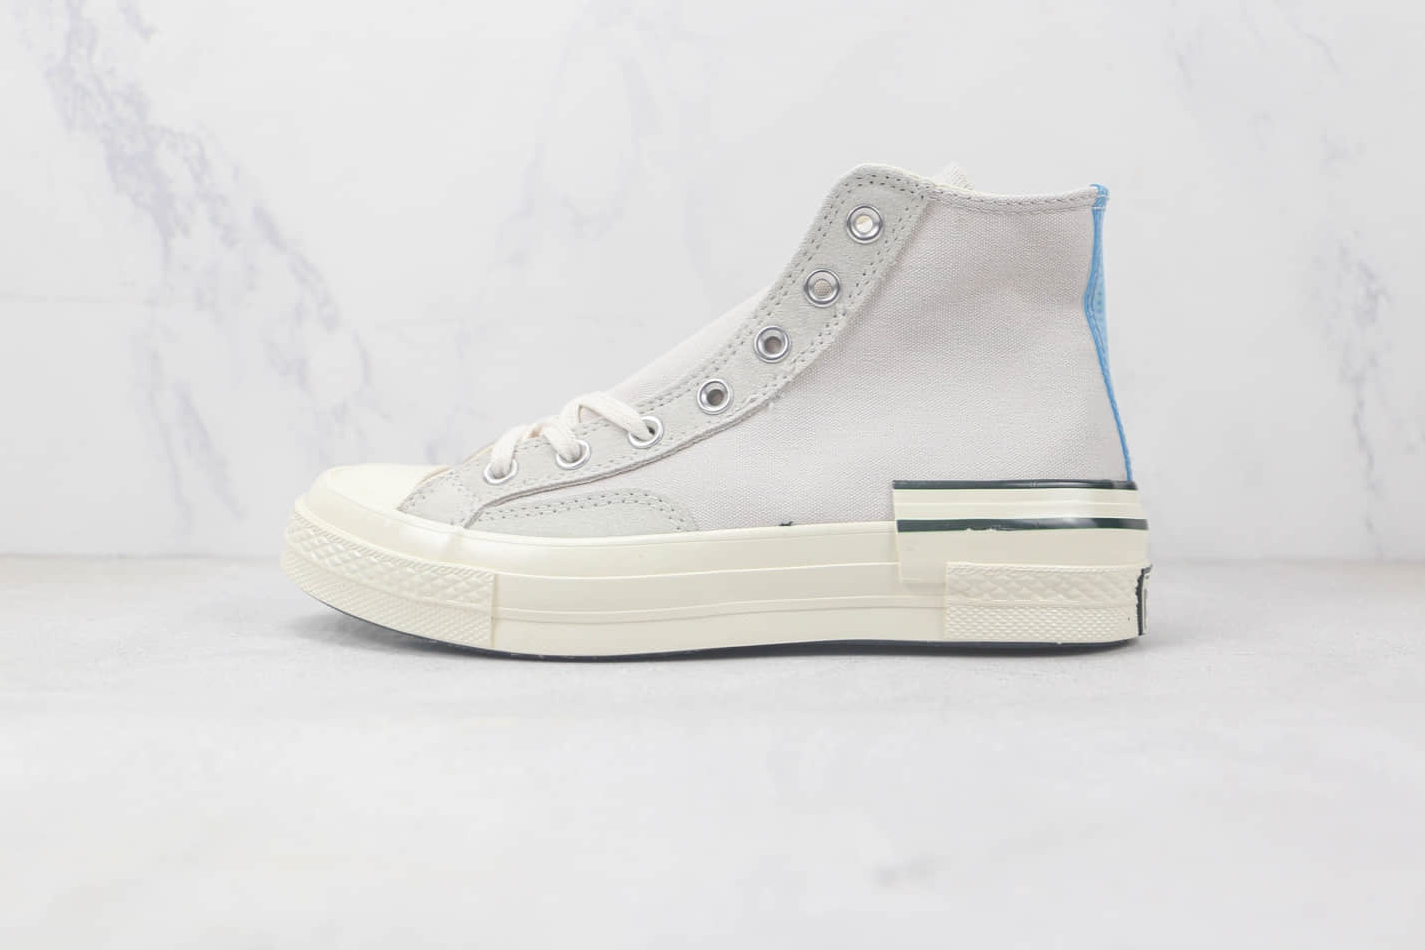 Converse Chuck 70 High 'Grey Ivory Blue' A04286C - Stylish Sneakers for Every Outfit